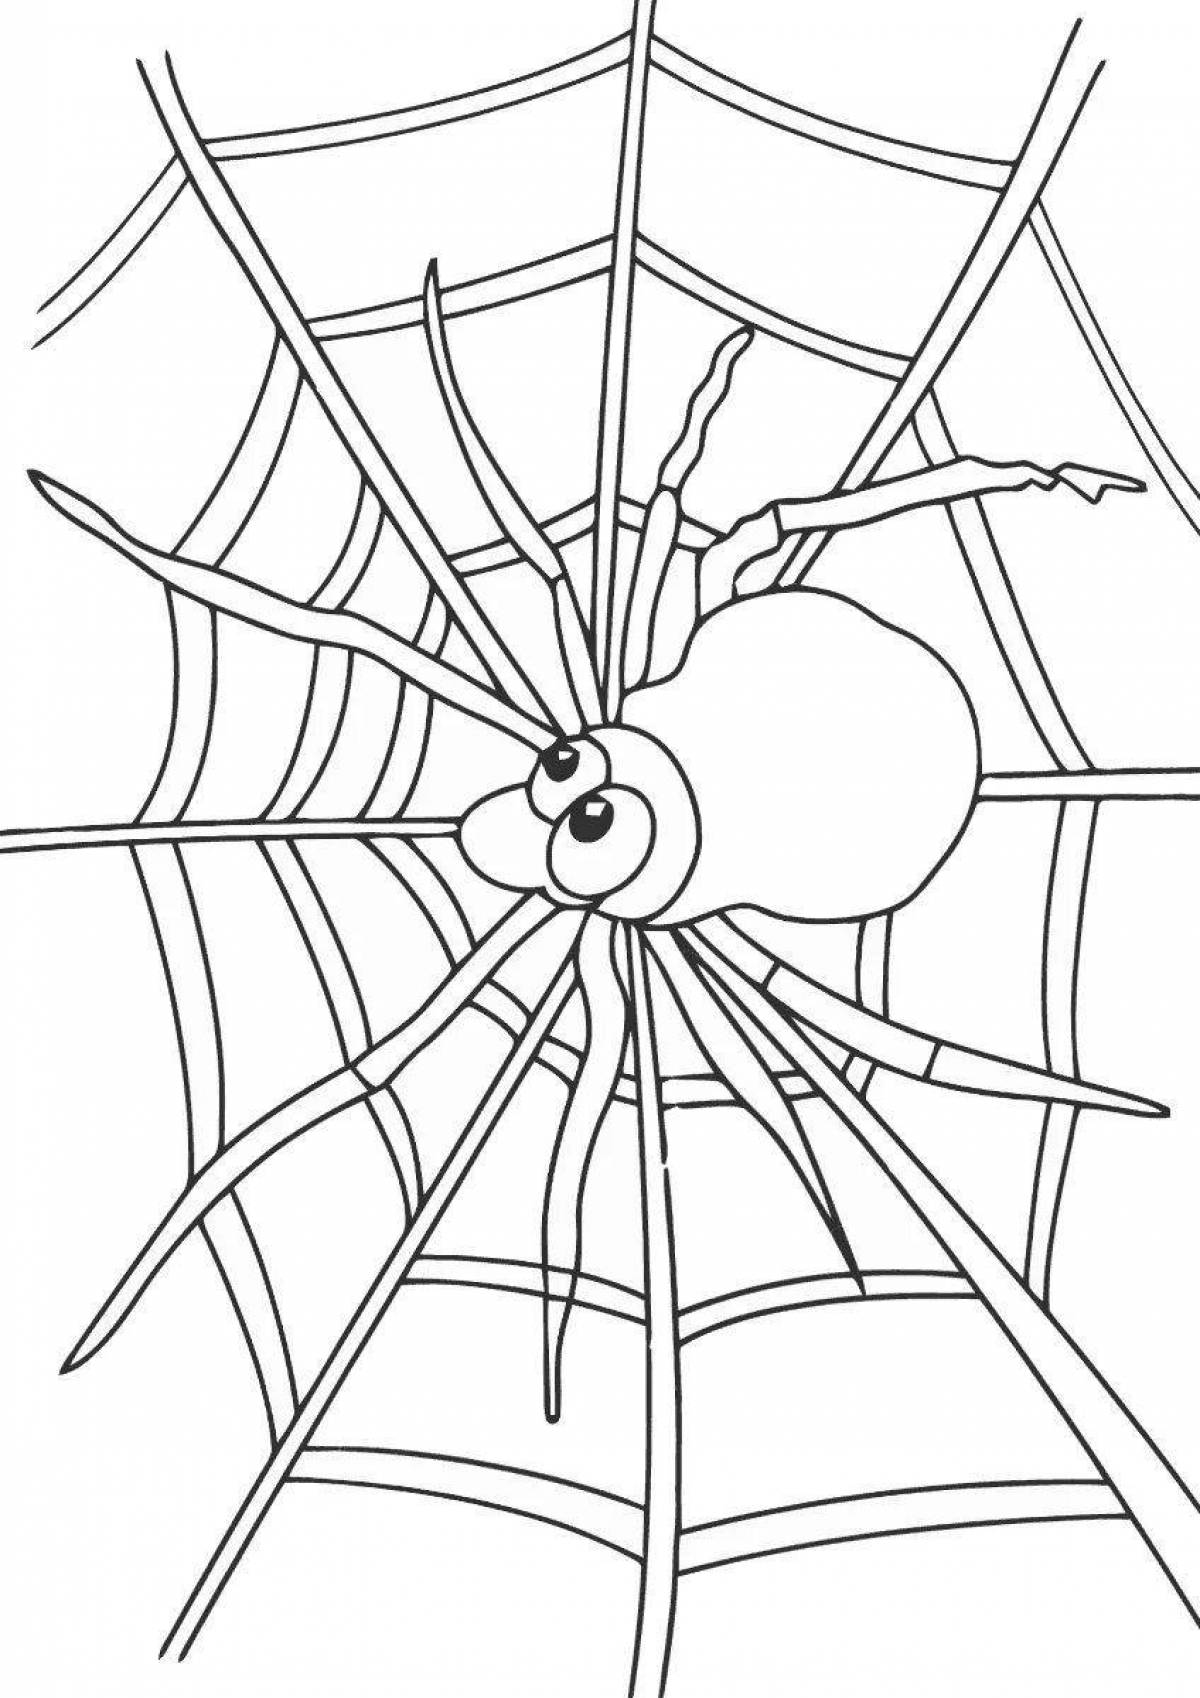 Incredible spider coloring book for kids